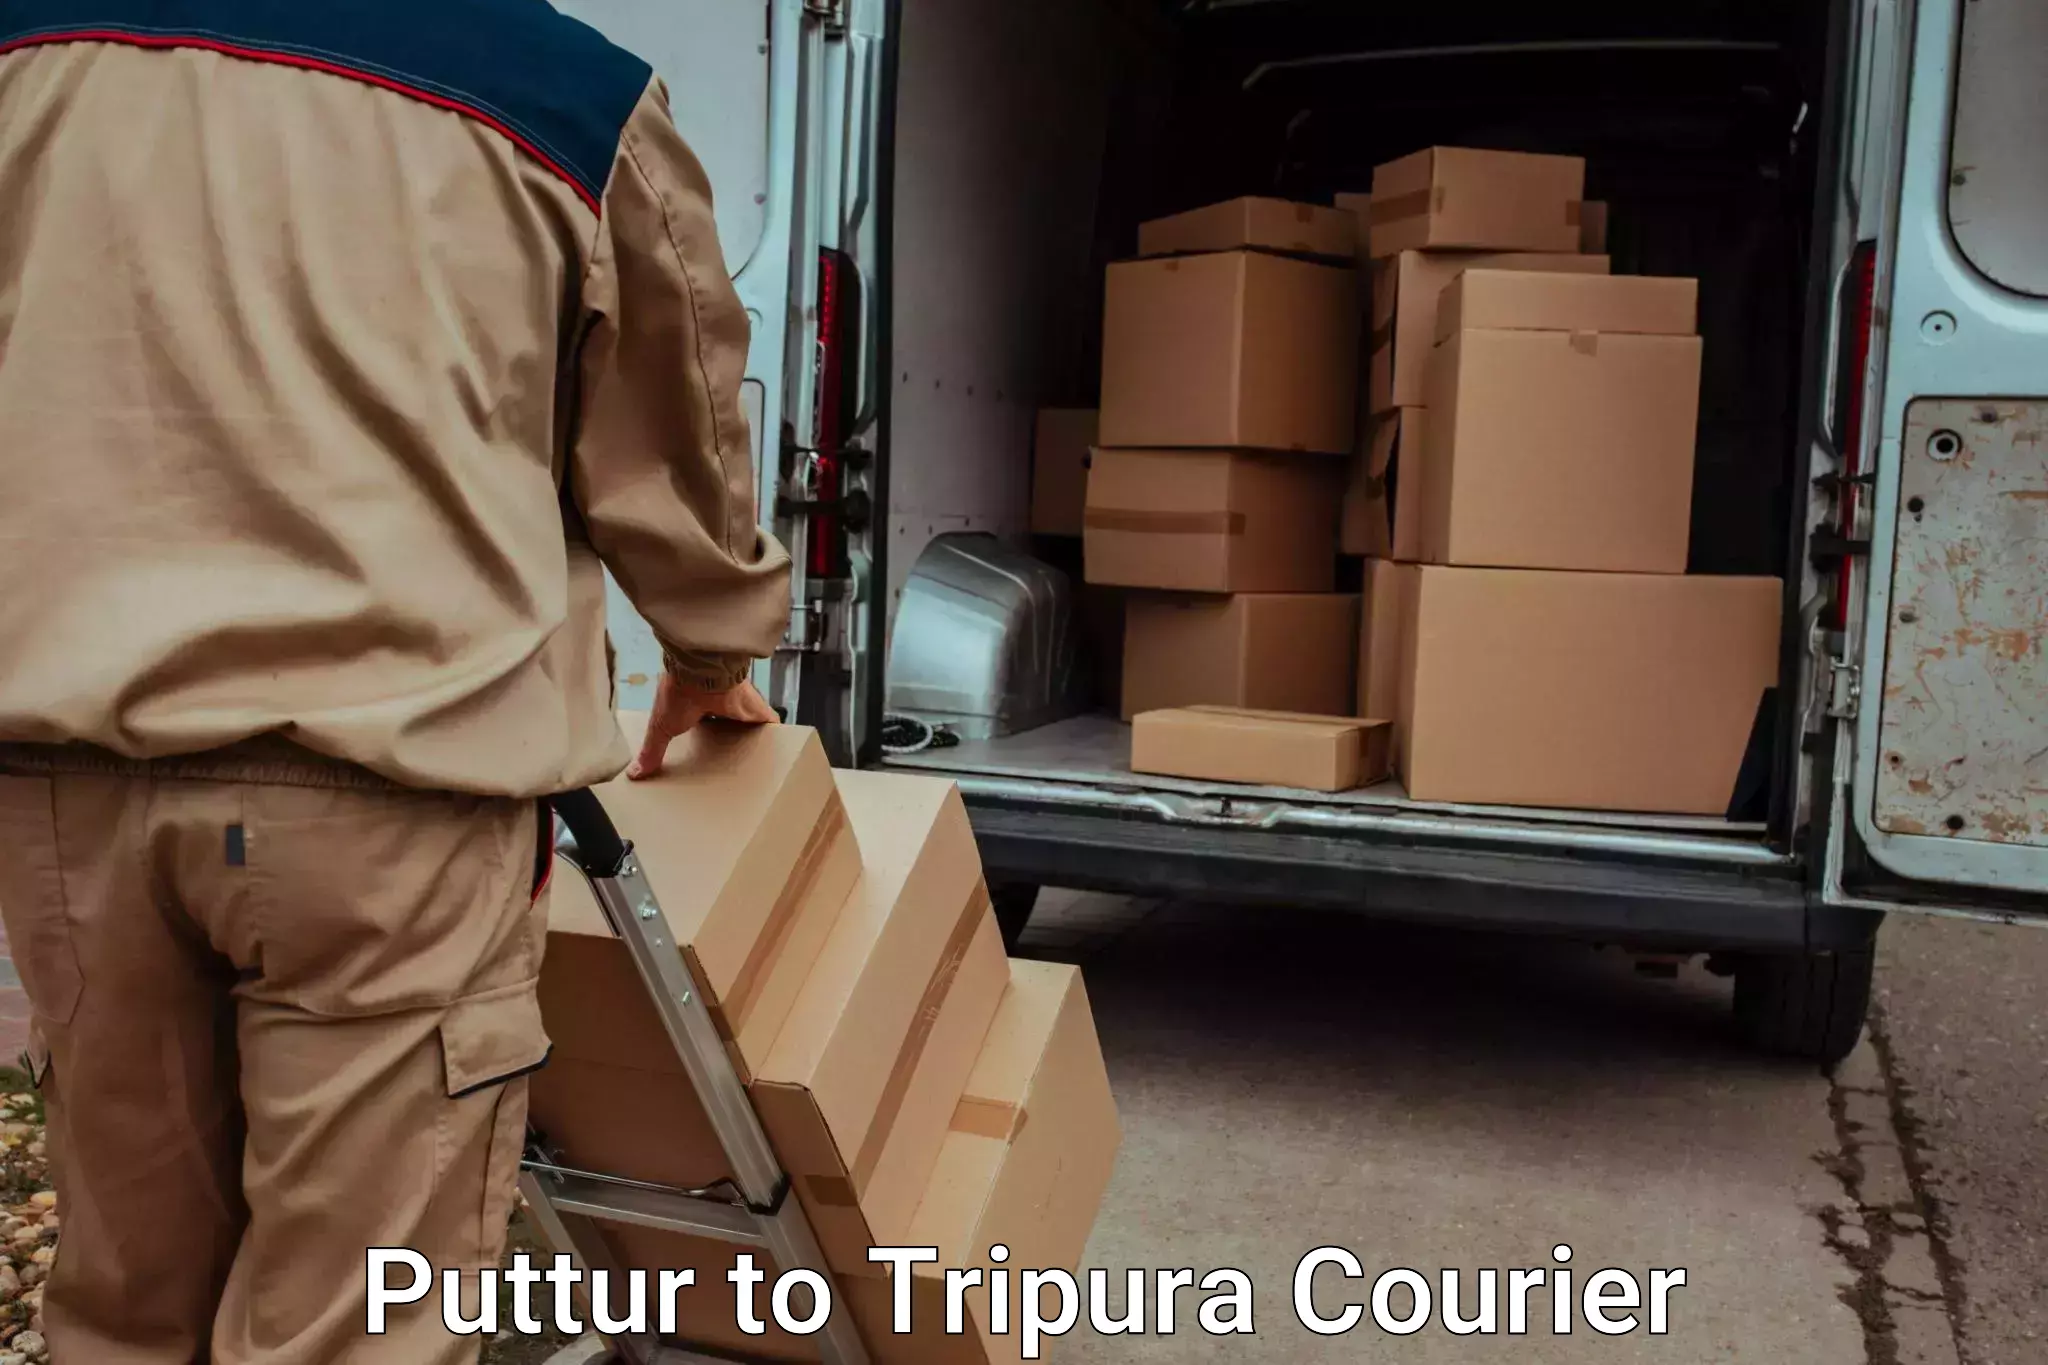 Hassle-free luggage shipping Puttur to Udaipur Tripura